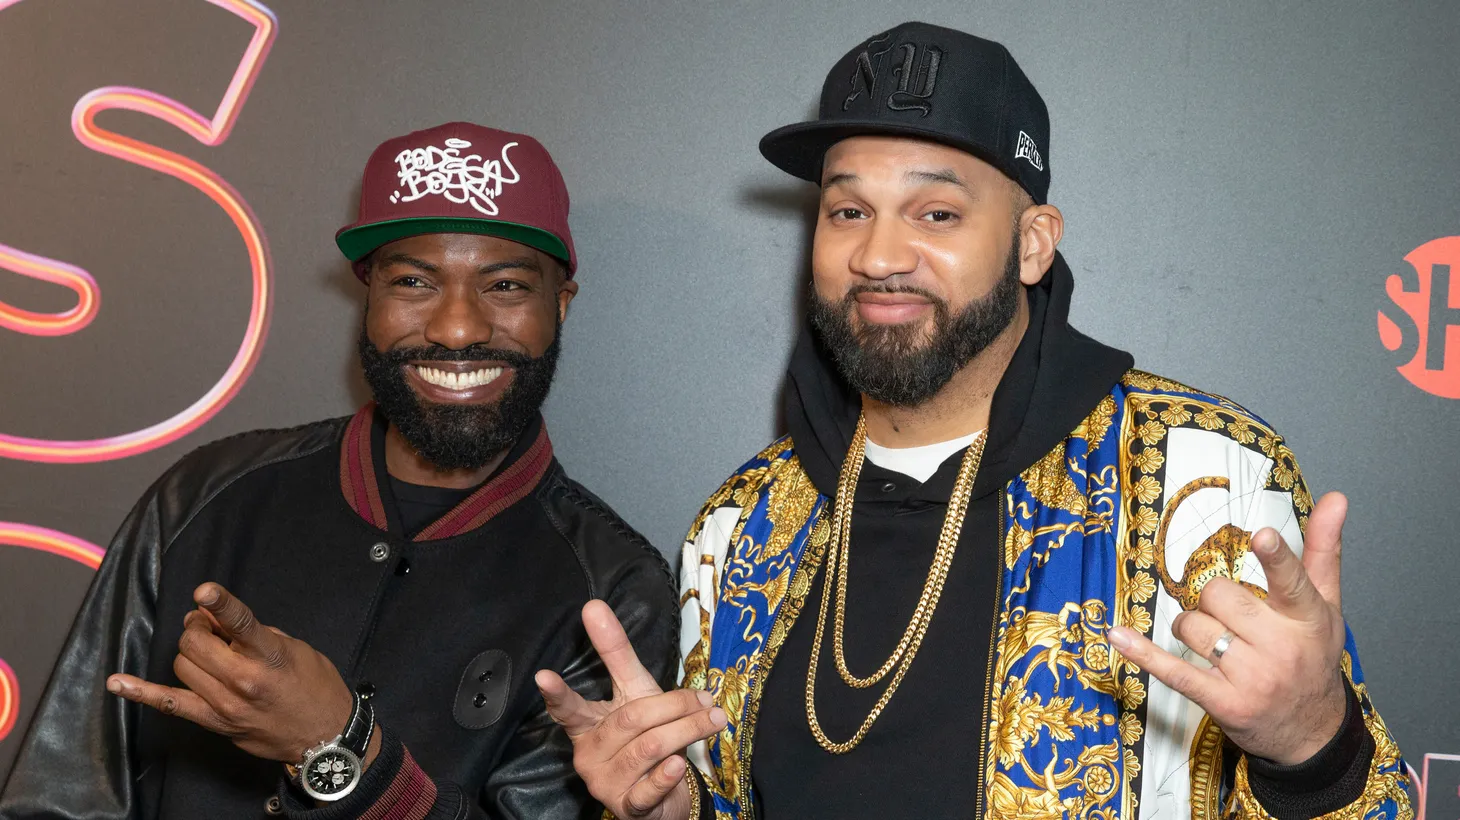 “There's a general feel for concern about the content we make [at Showtime] and the staff, and you don't generally get that as some of the other networks that we've had,” Desus Nice says. Desus (left) and The Kid Mero attend the premiere of their late-night series “Desus & Mero” at the Clocktower New York Edition New York, on February 21, 2019.